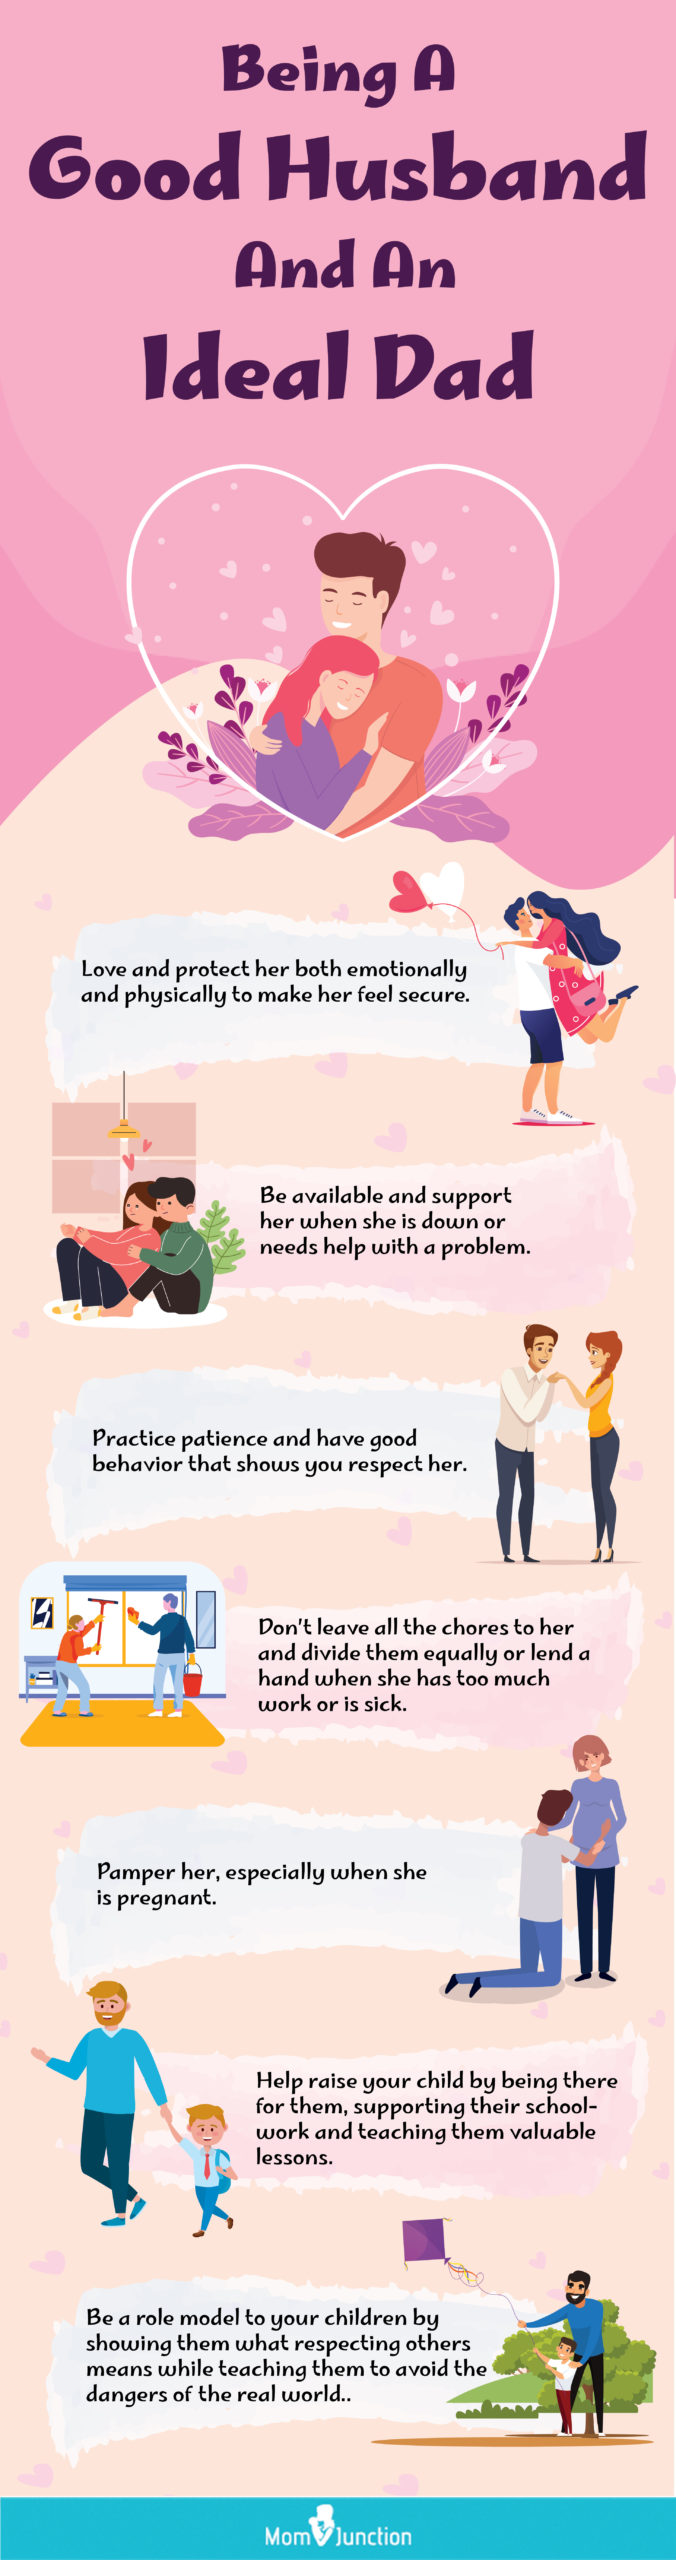 being a good husband (infographic)